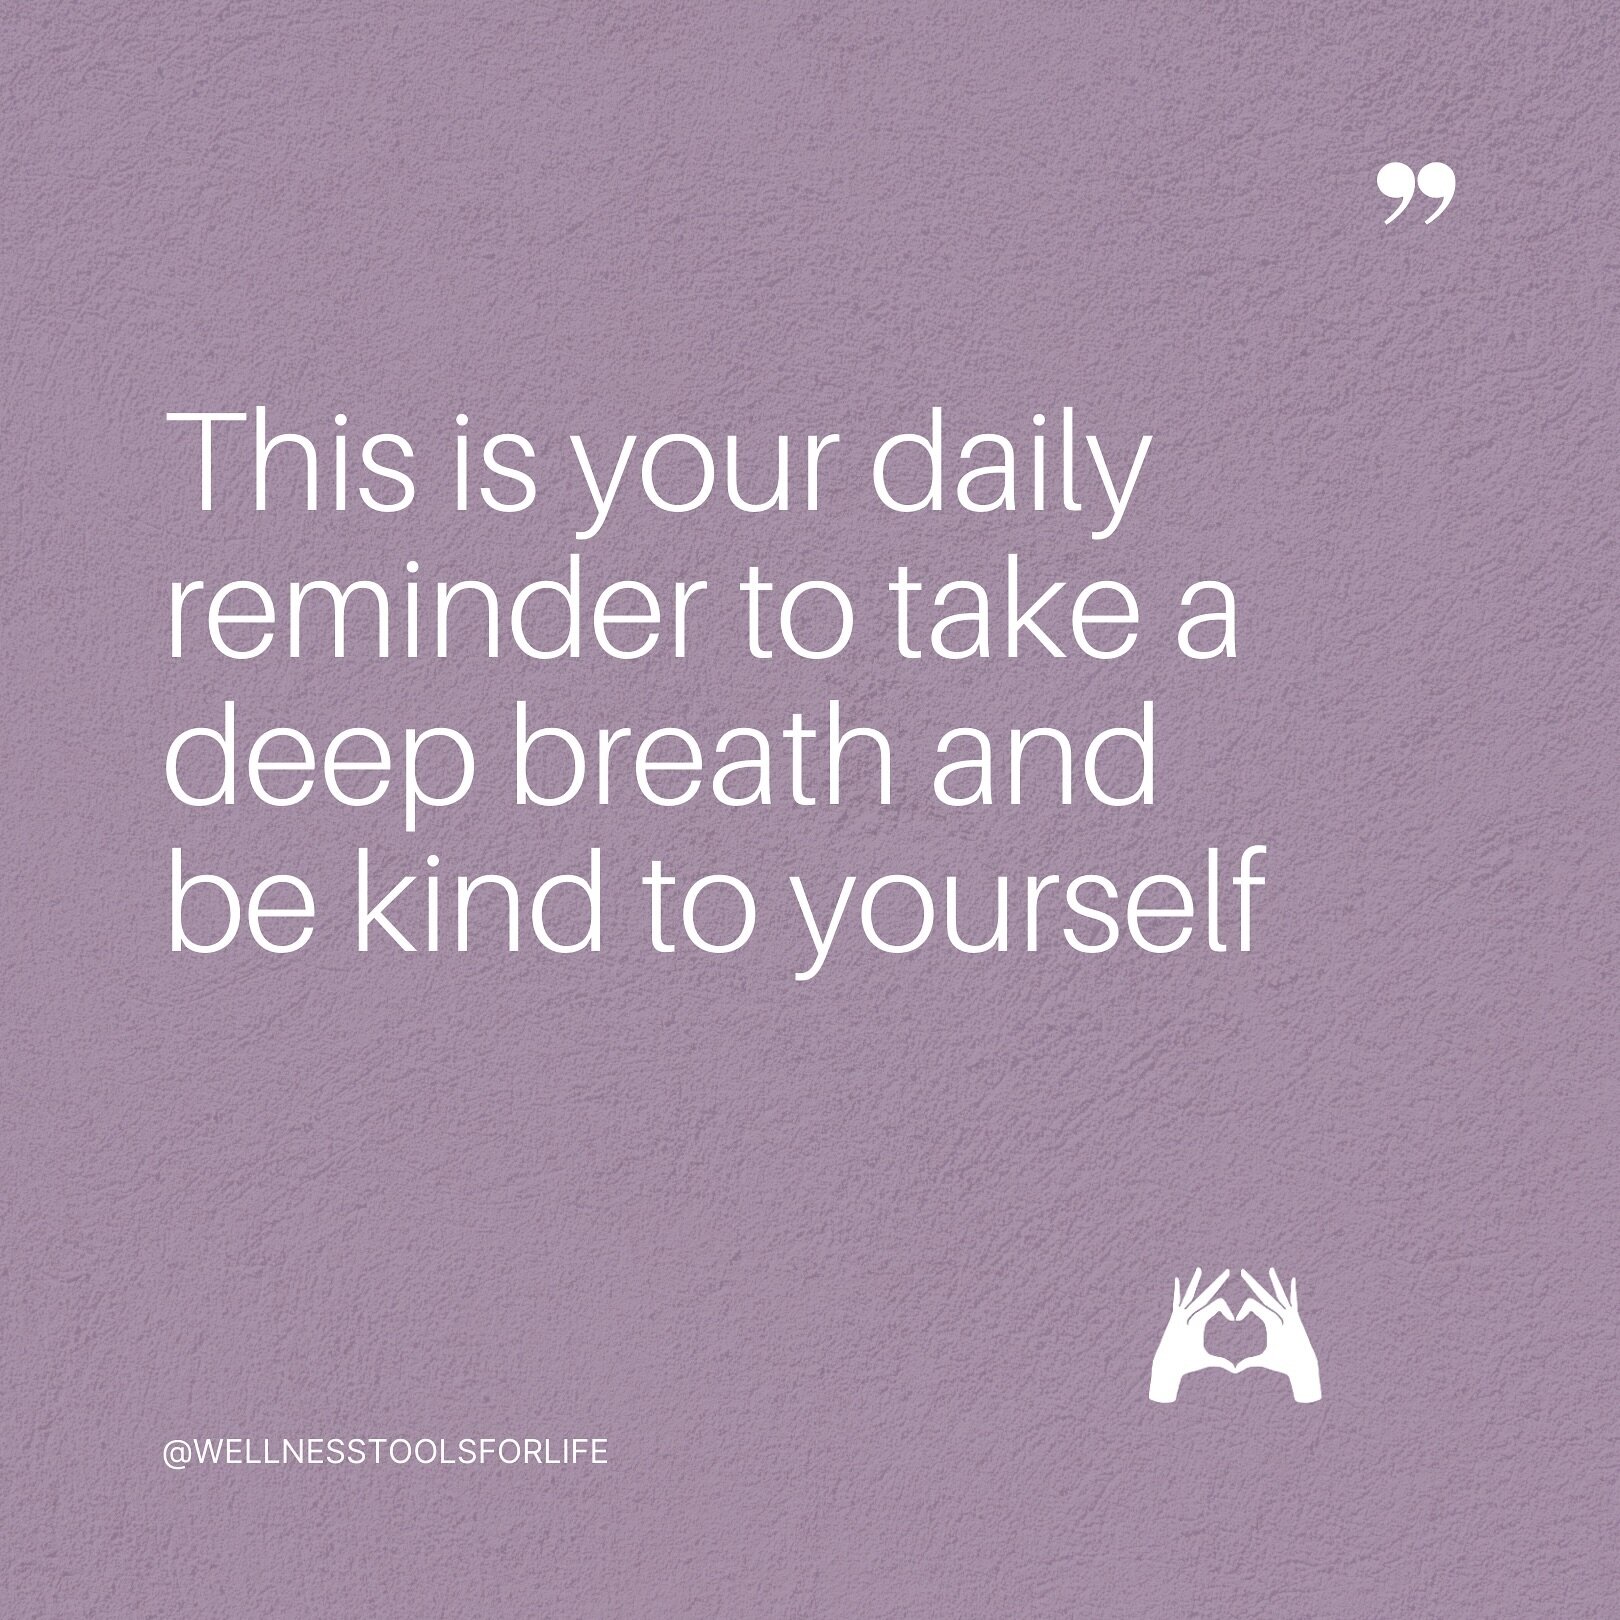 This is your daily reminder to take a deep breath and be kind to yourself!! #essexmentalhealthawareness 
#essexmentalhealth 
#ingatestonebusiness 
#brentwoodmums 
#billericaymums 
#billericaybusiness